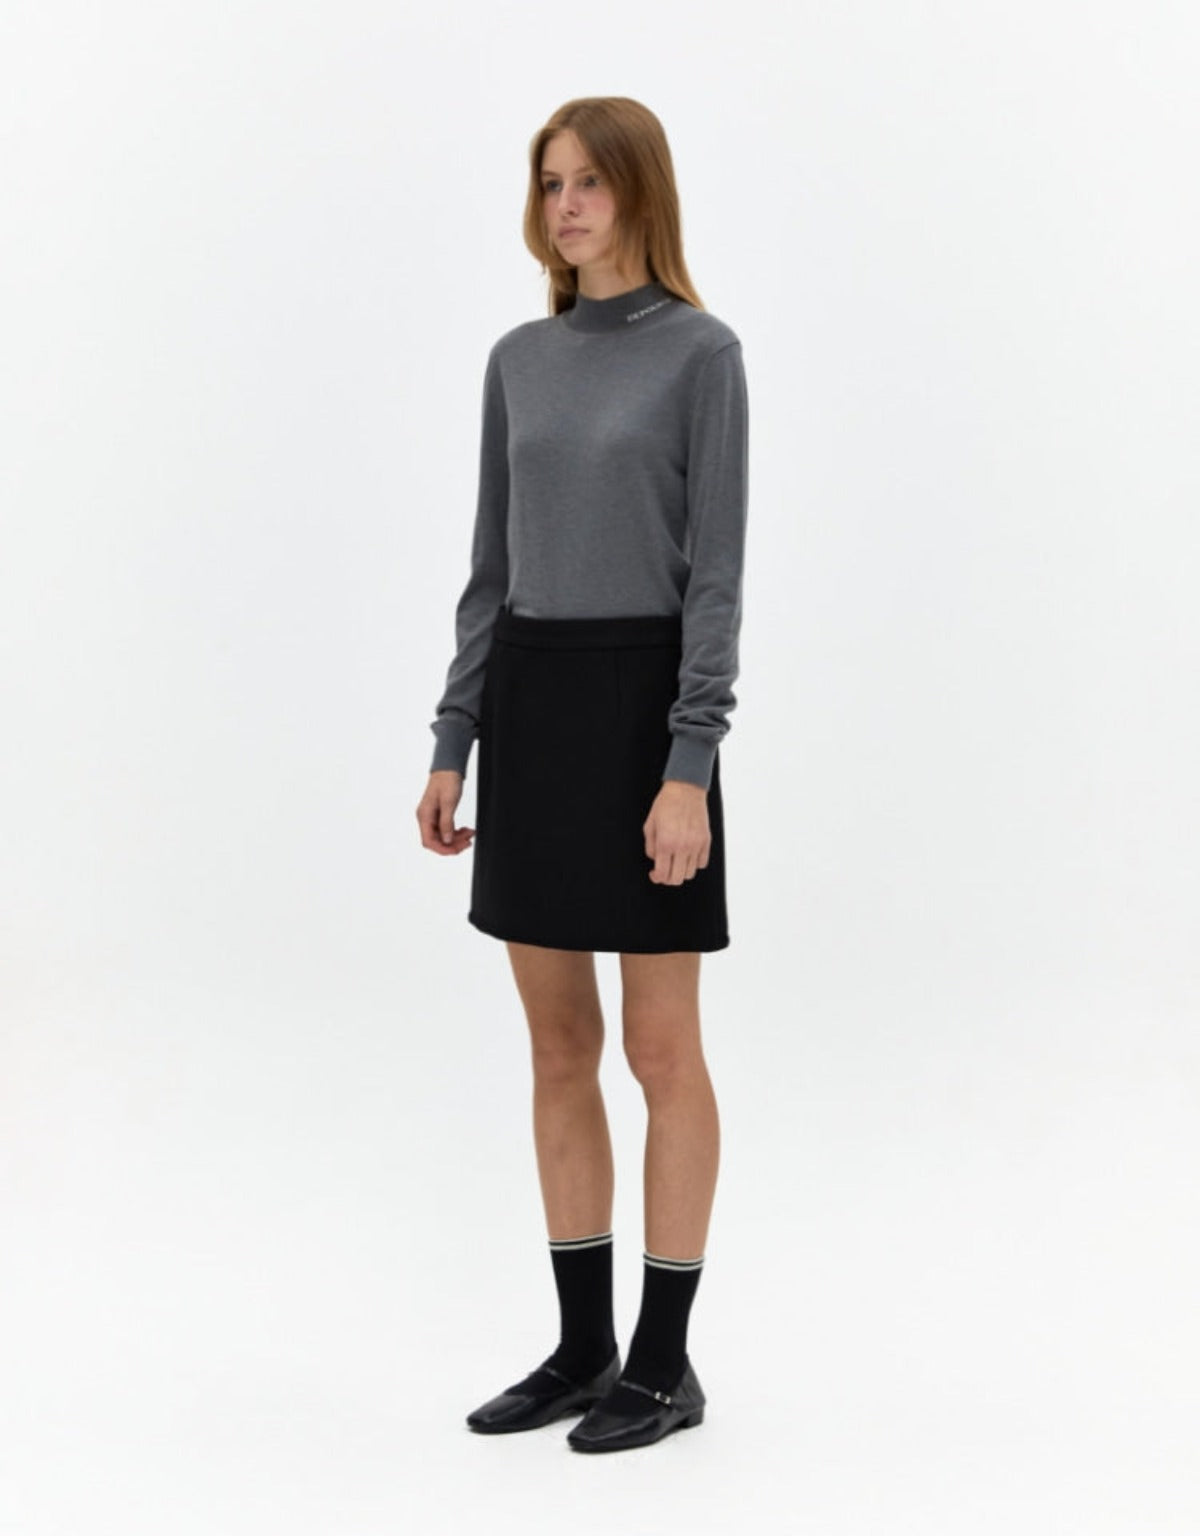 Turtle Neck Knit In Gray